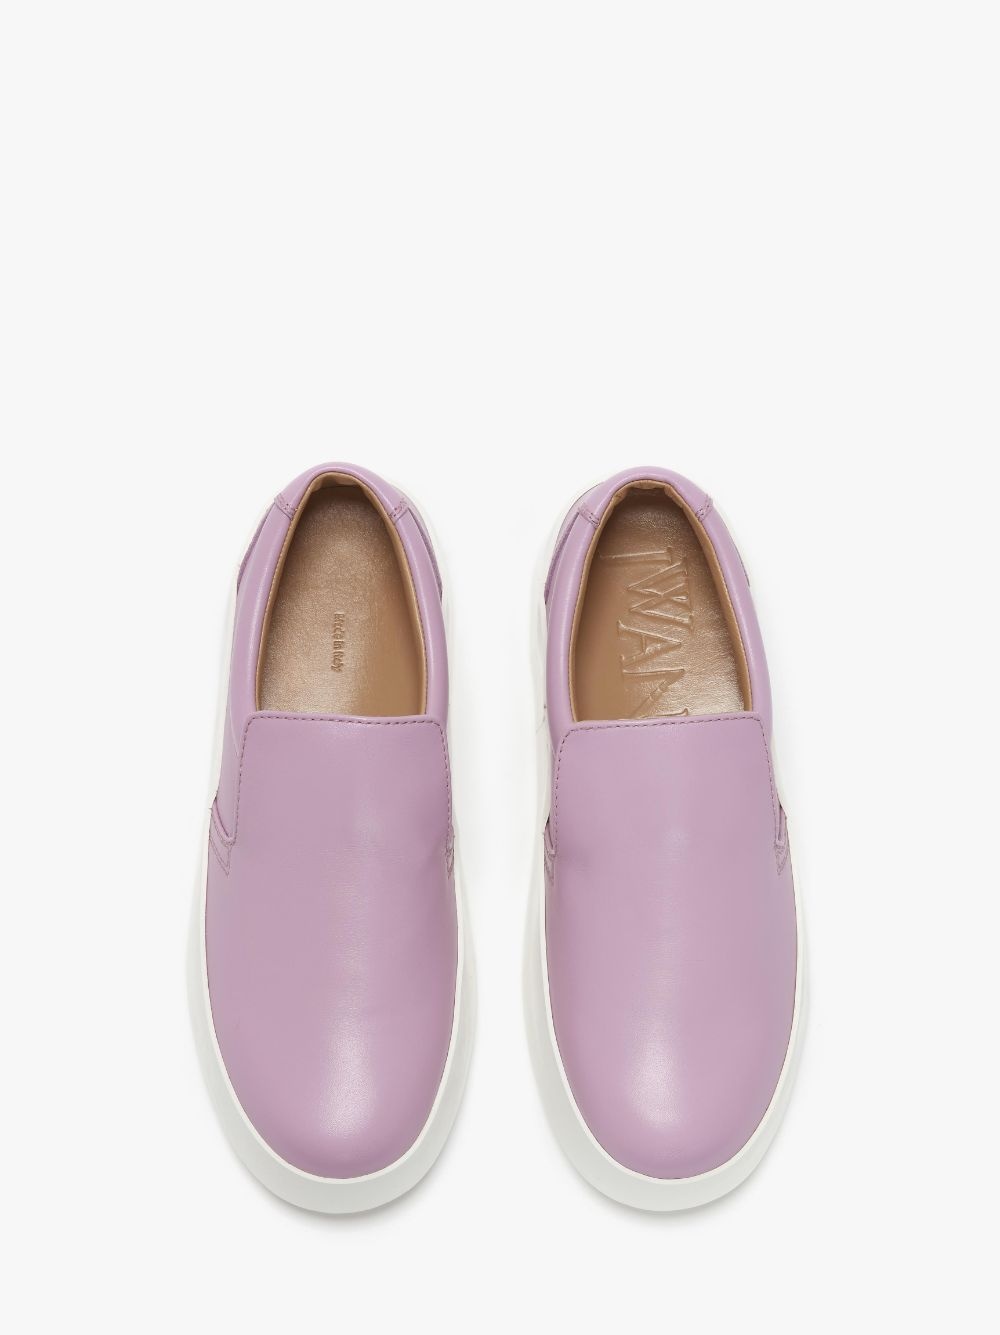 LEATHER SLIP-ONS - 4